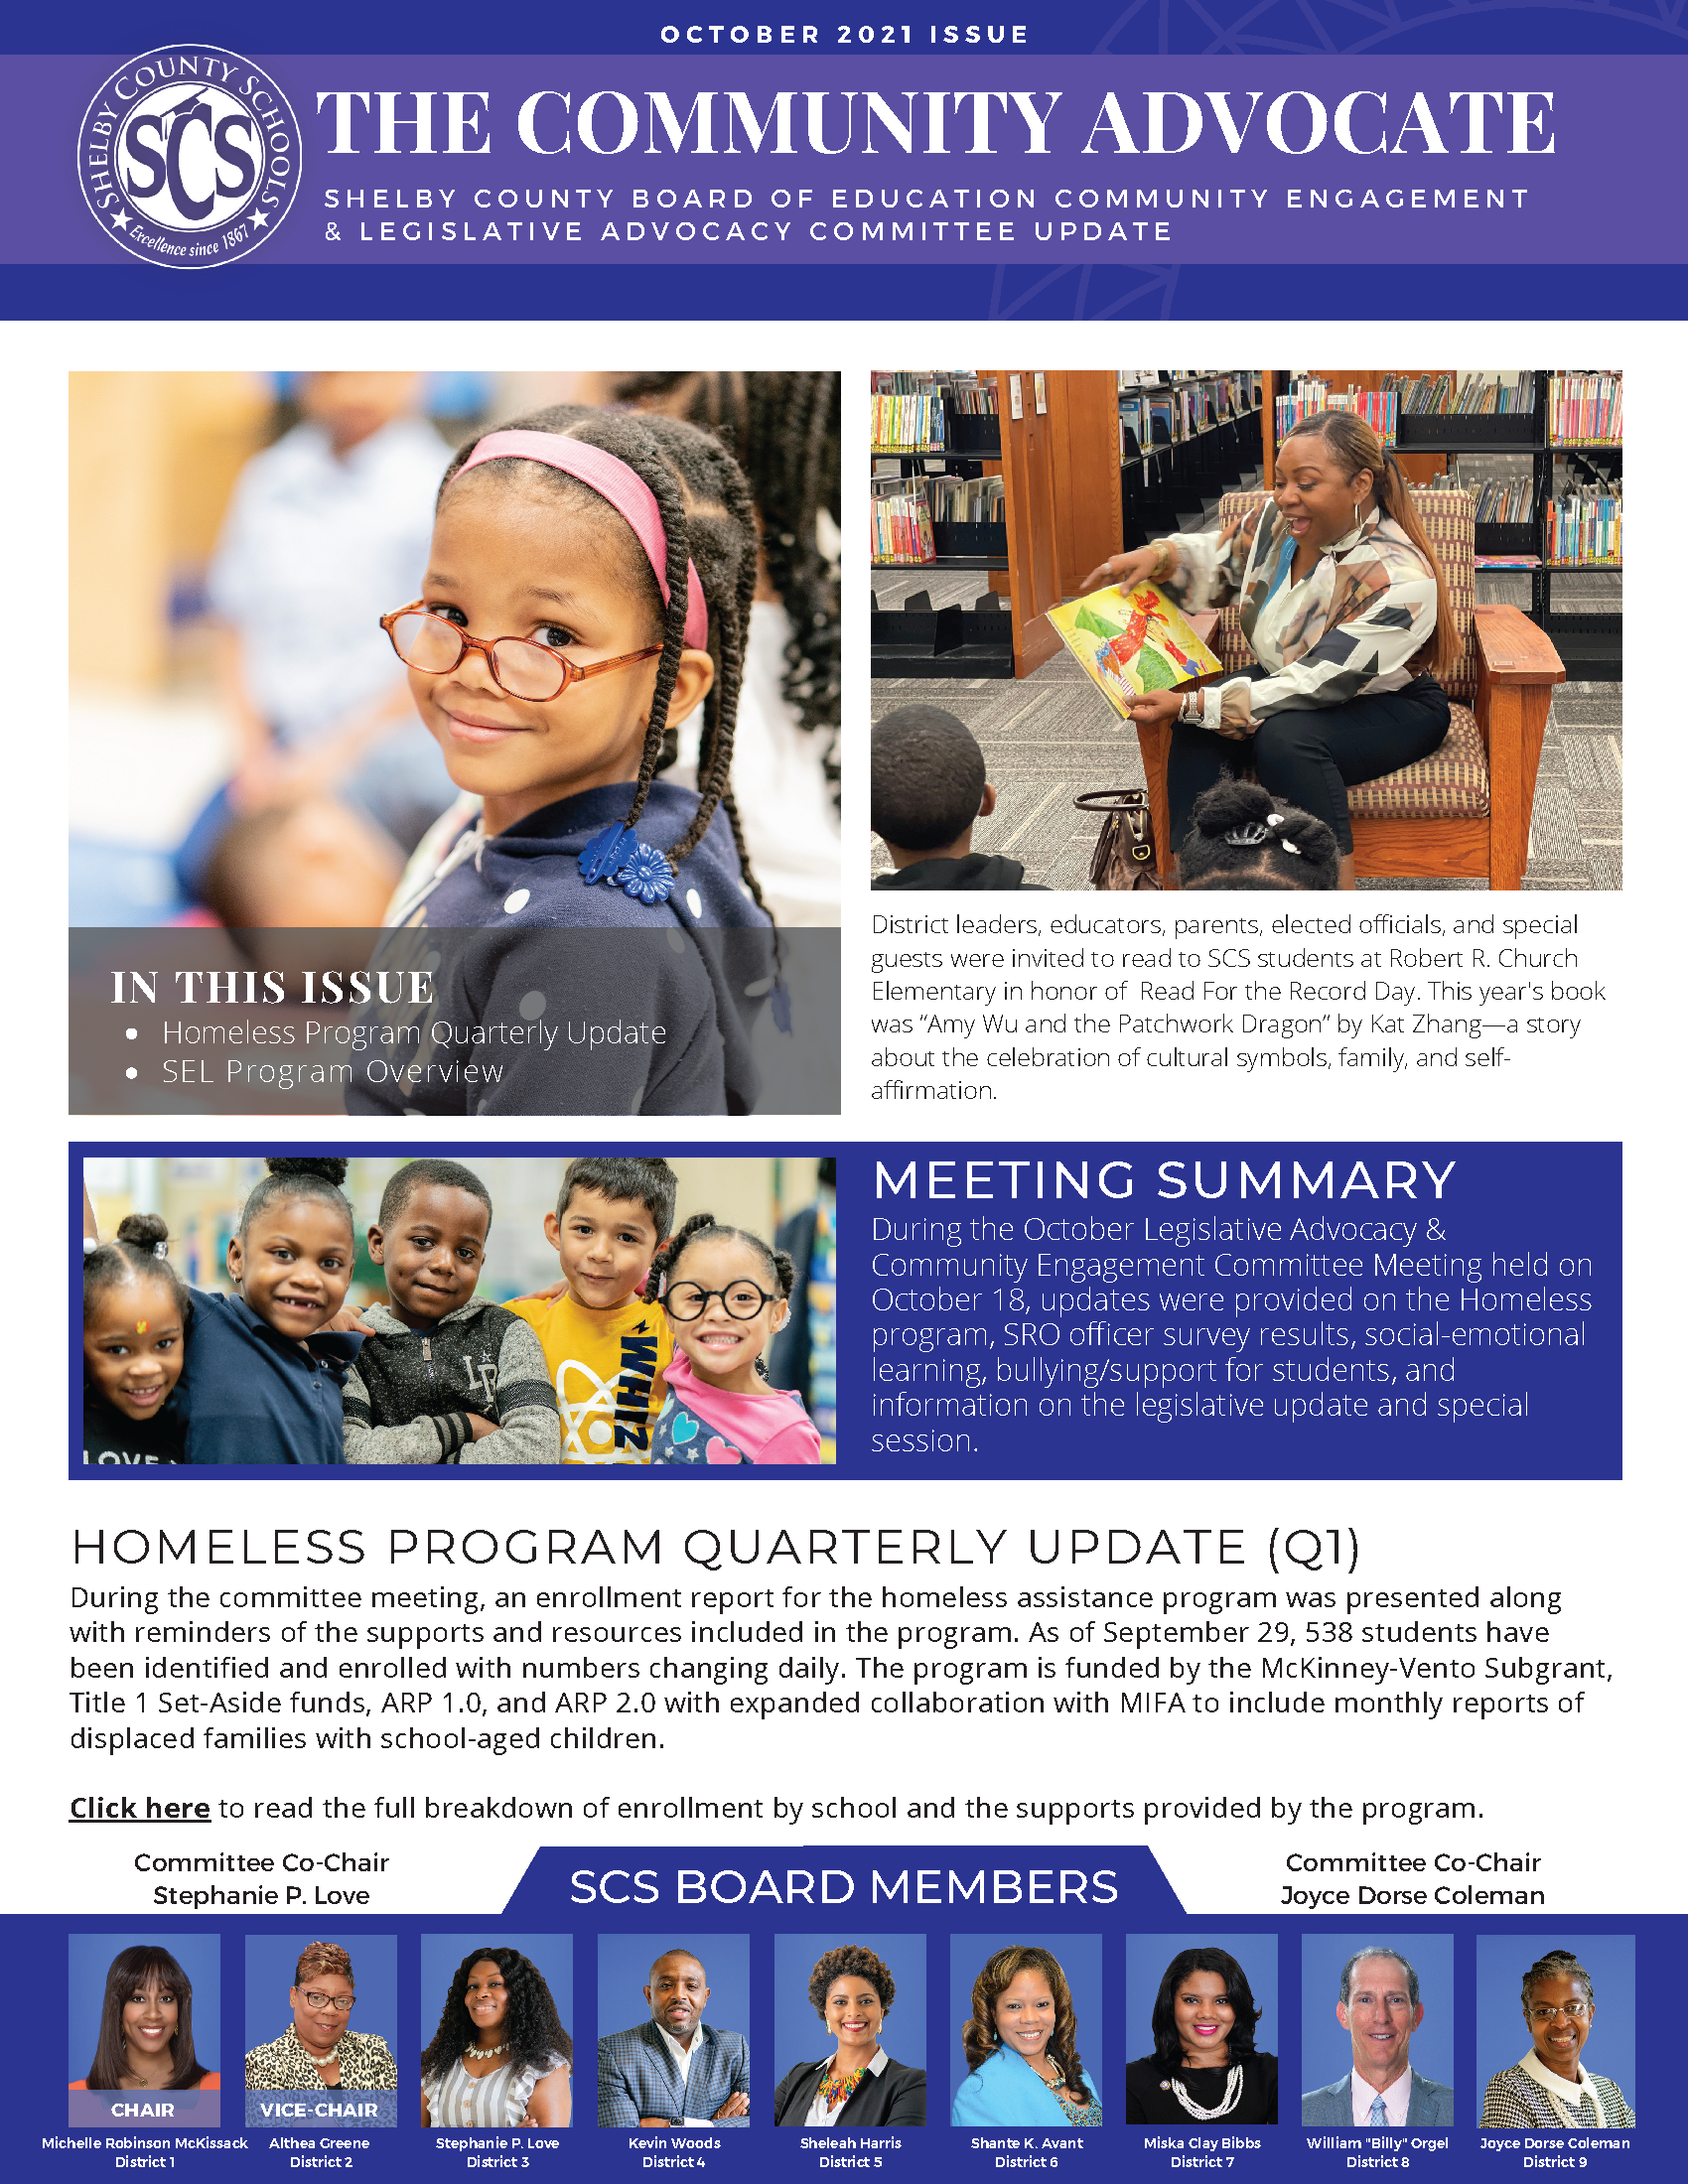 The Community Advocate (Community Outreach & Engagement Newsletter) October 2021